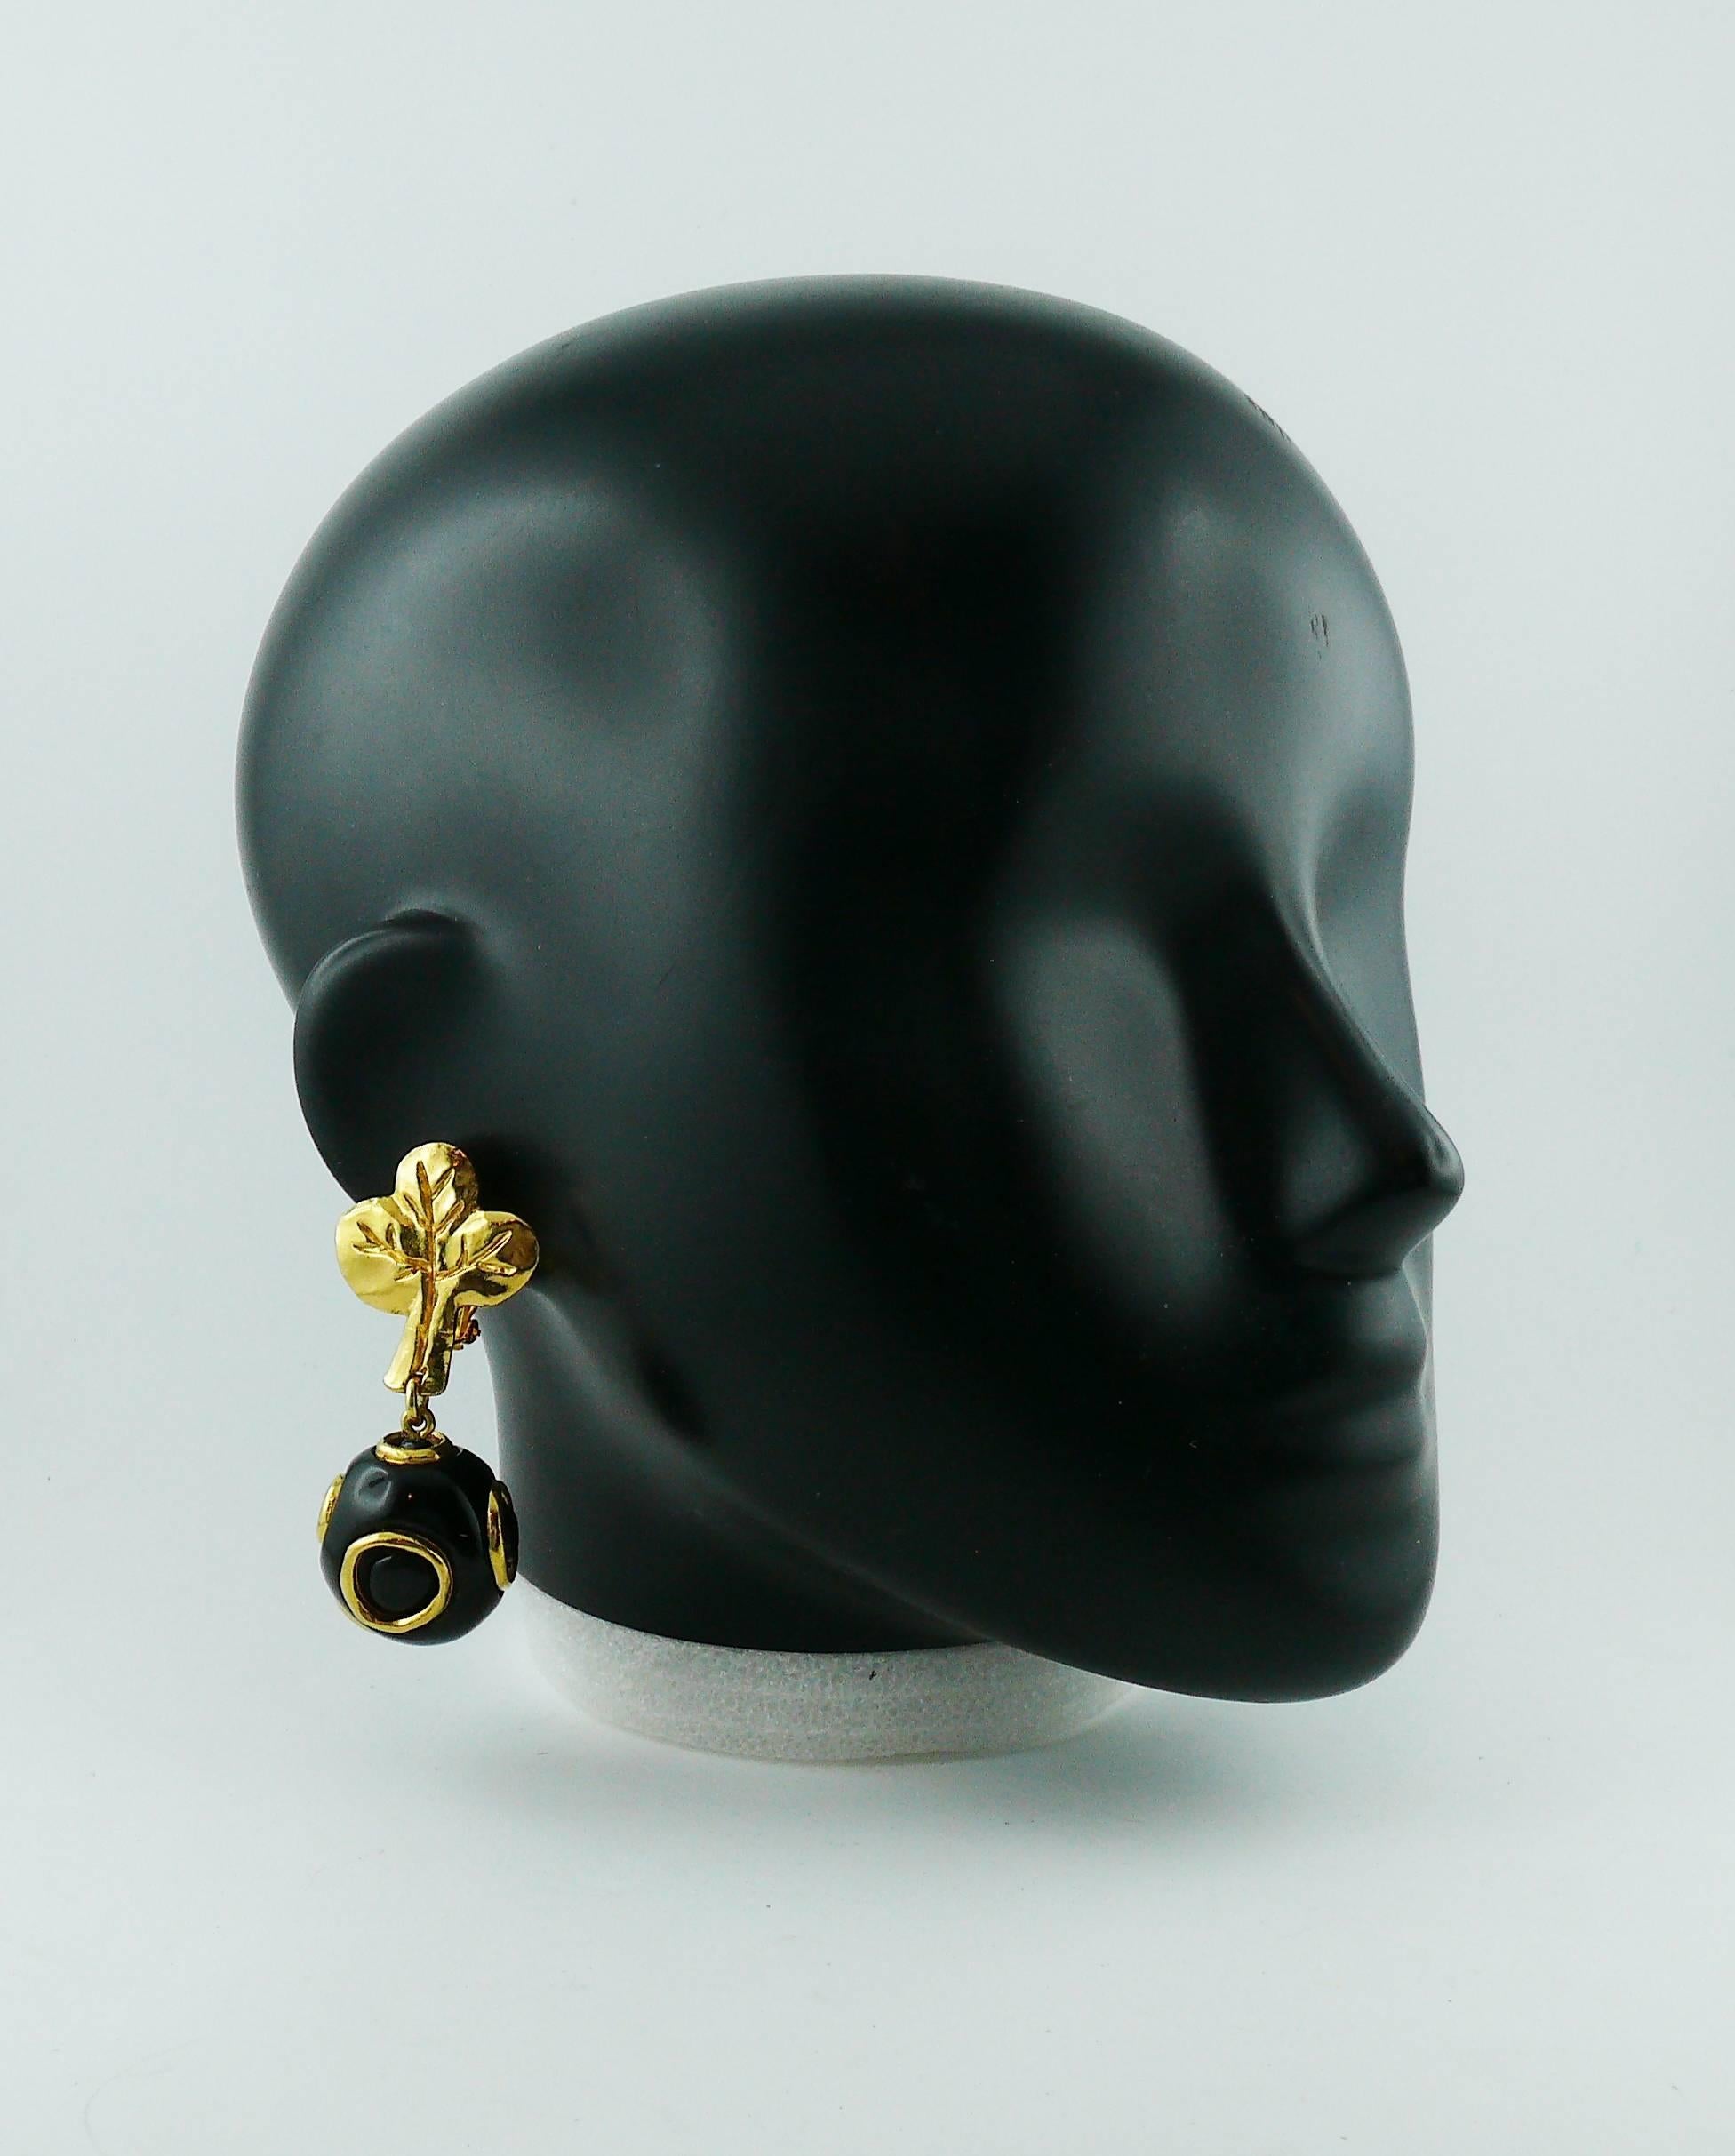 CHRISTIAN LACROIX vintage dangling earrings (clip-on) featuring an abstract gold toned tree top and a large black resin ball with geometric design.

Marked Christian Lacroix CL Made in France.

Indicative measurements : length approx. 6.5 cm (2.56